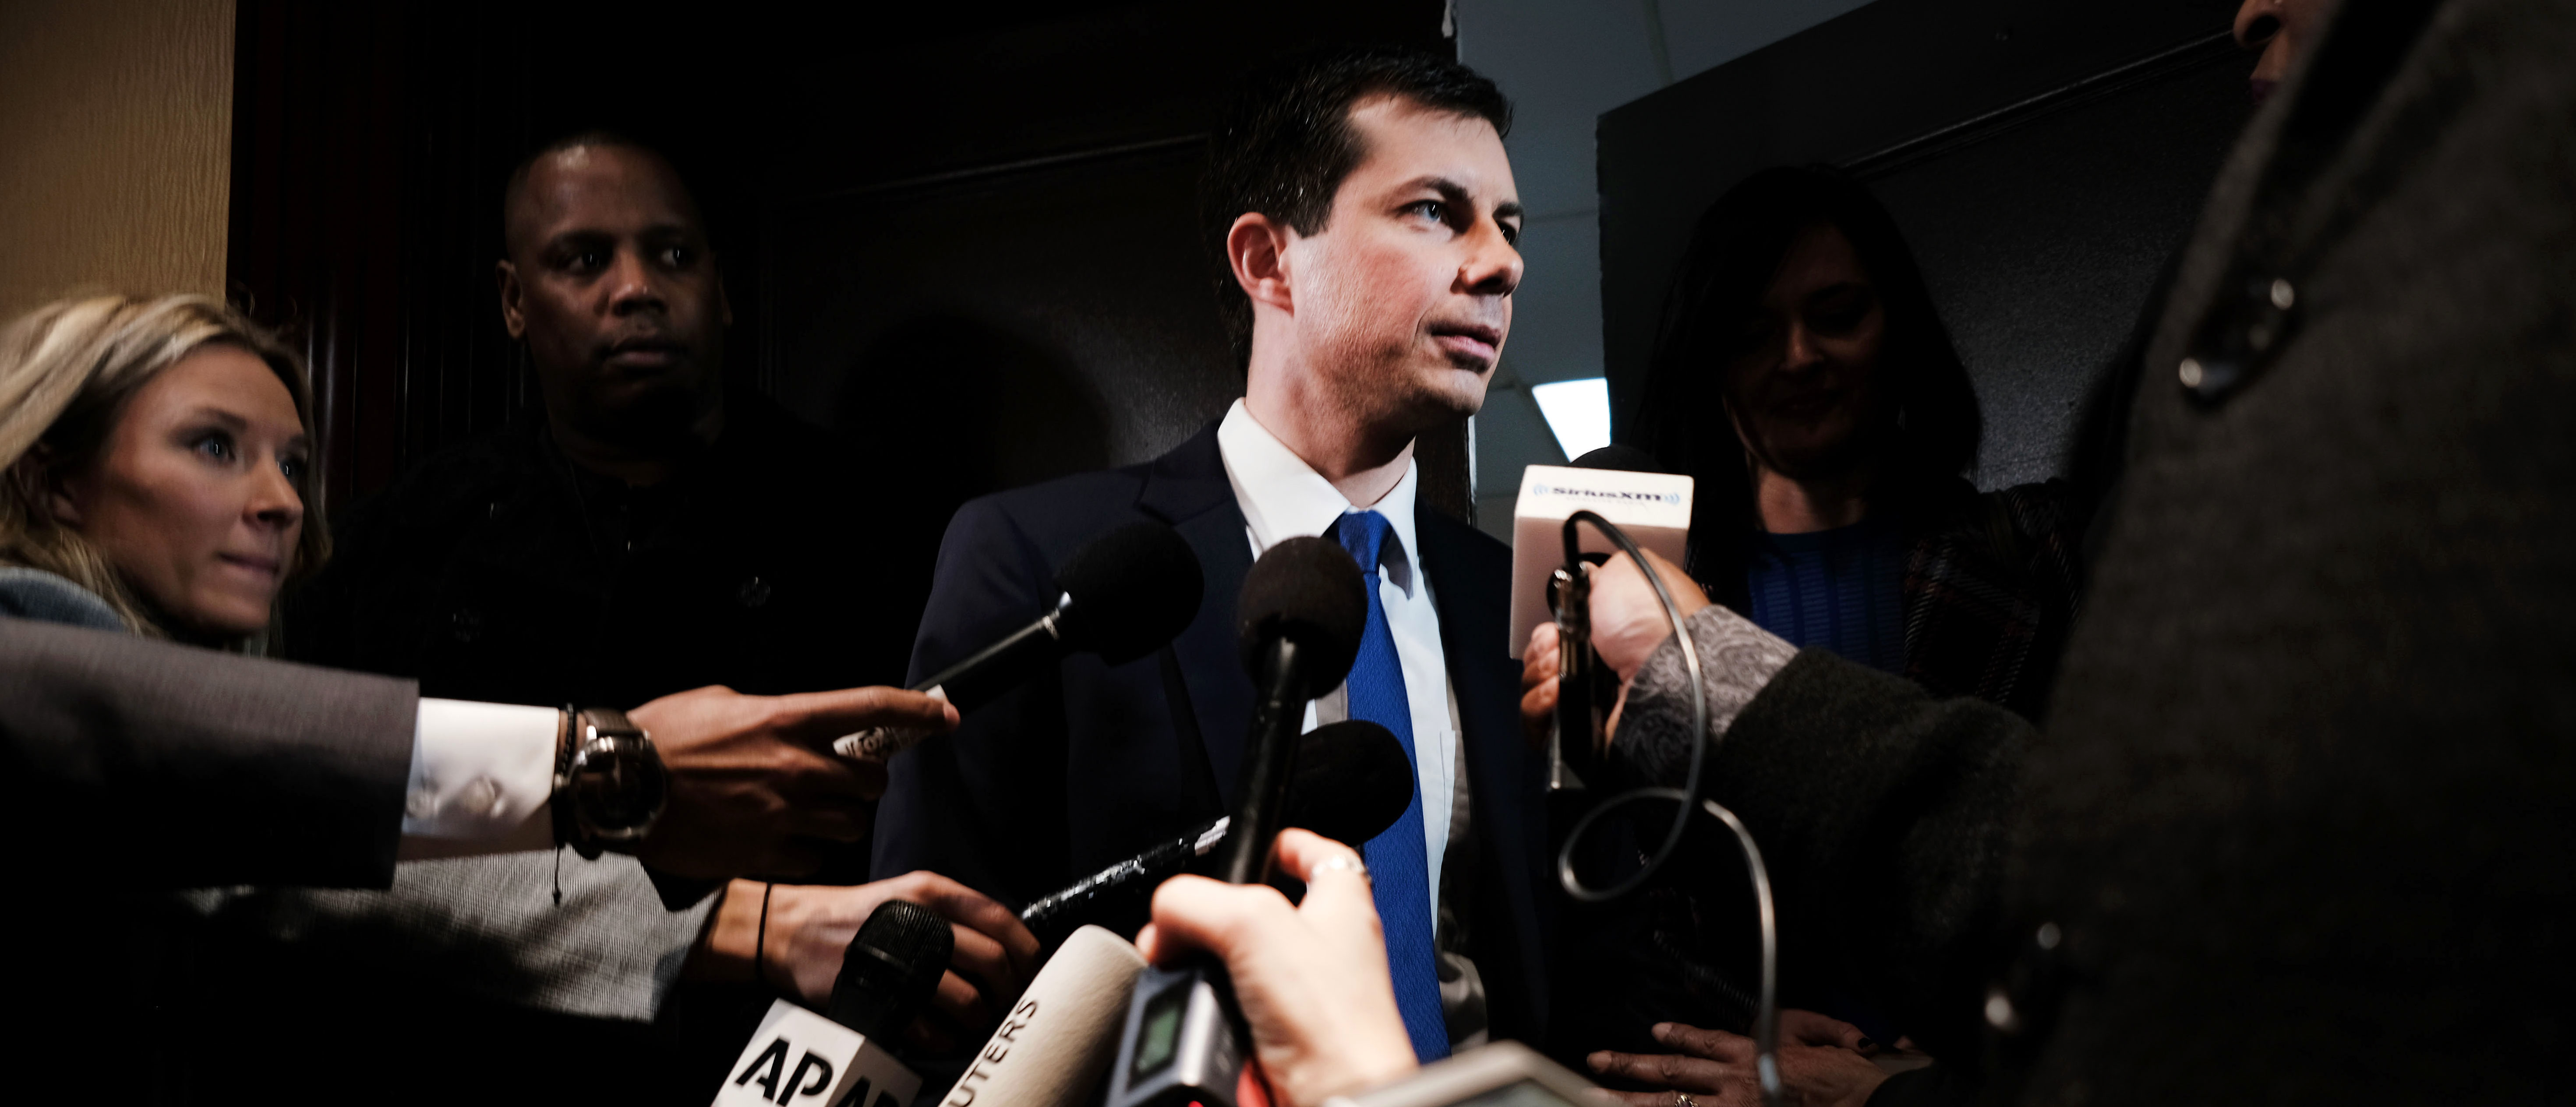 NEW YORK, NEW YORK - APRIL 04: Democratic presidential hopeful South Bend, Indiana mayor Pete Buttigieg speaks to the media at the National Action Network's annual convention on April 4, 2019 in New York City. A dozen 2020 Democratic presidential candidates will speak at the organization's convention this week. Founded by Rev. Al Sharpton in 1991, the National Action Network is one of the most influential African American organizations dedicated to civil rights in America. (Photo by Spencer Platt/Getty Images)